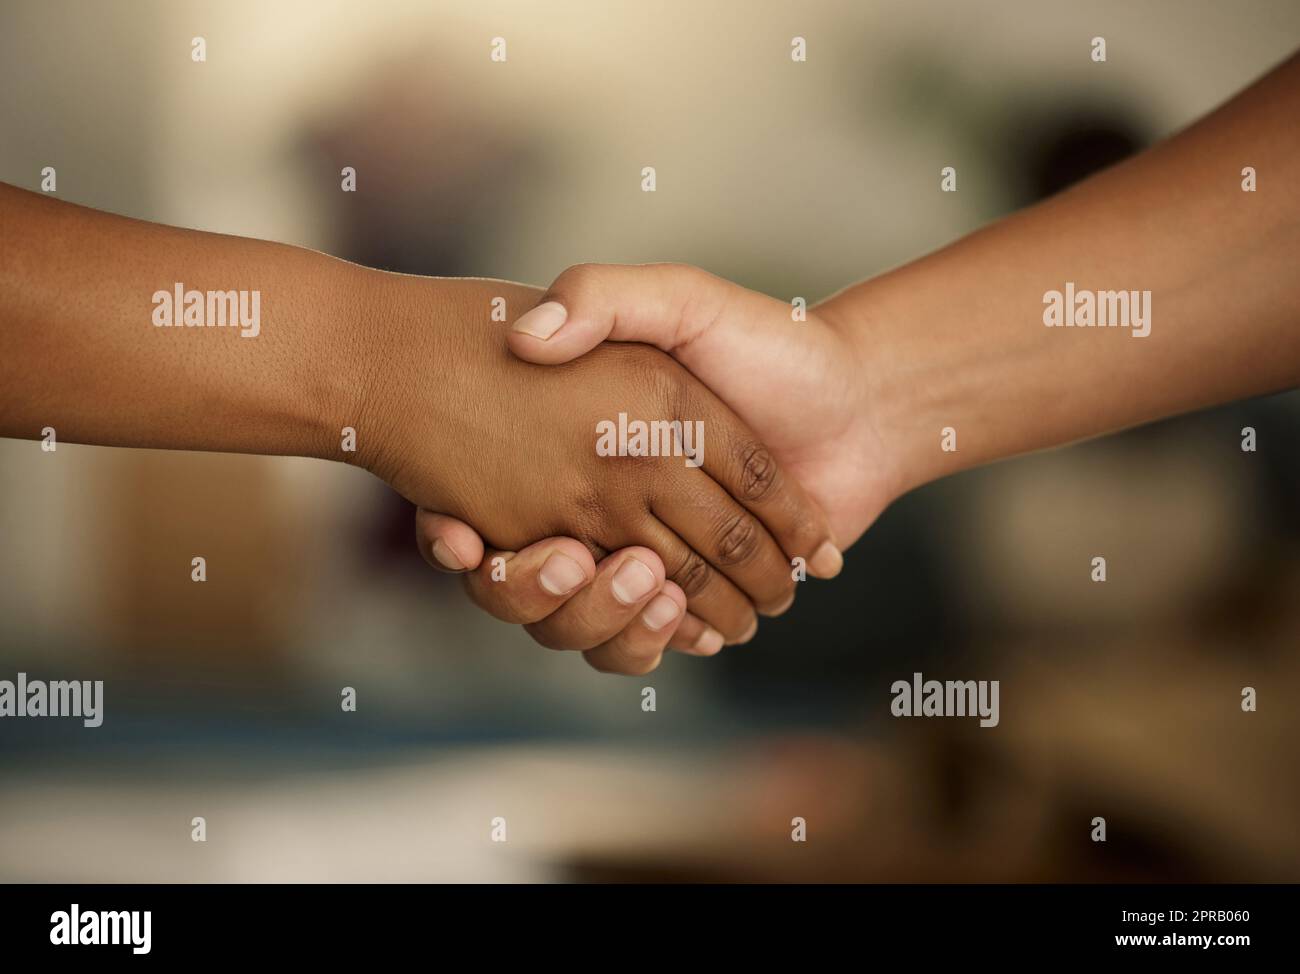 Closeup hands in handshake showing meeting, success and team support. Manager welcoming, promoting or agreeing with colleague in hand gesture. Two people symbolizing unity, power or strength together Stock Photo